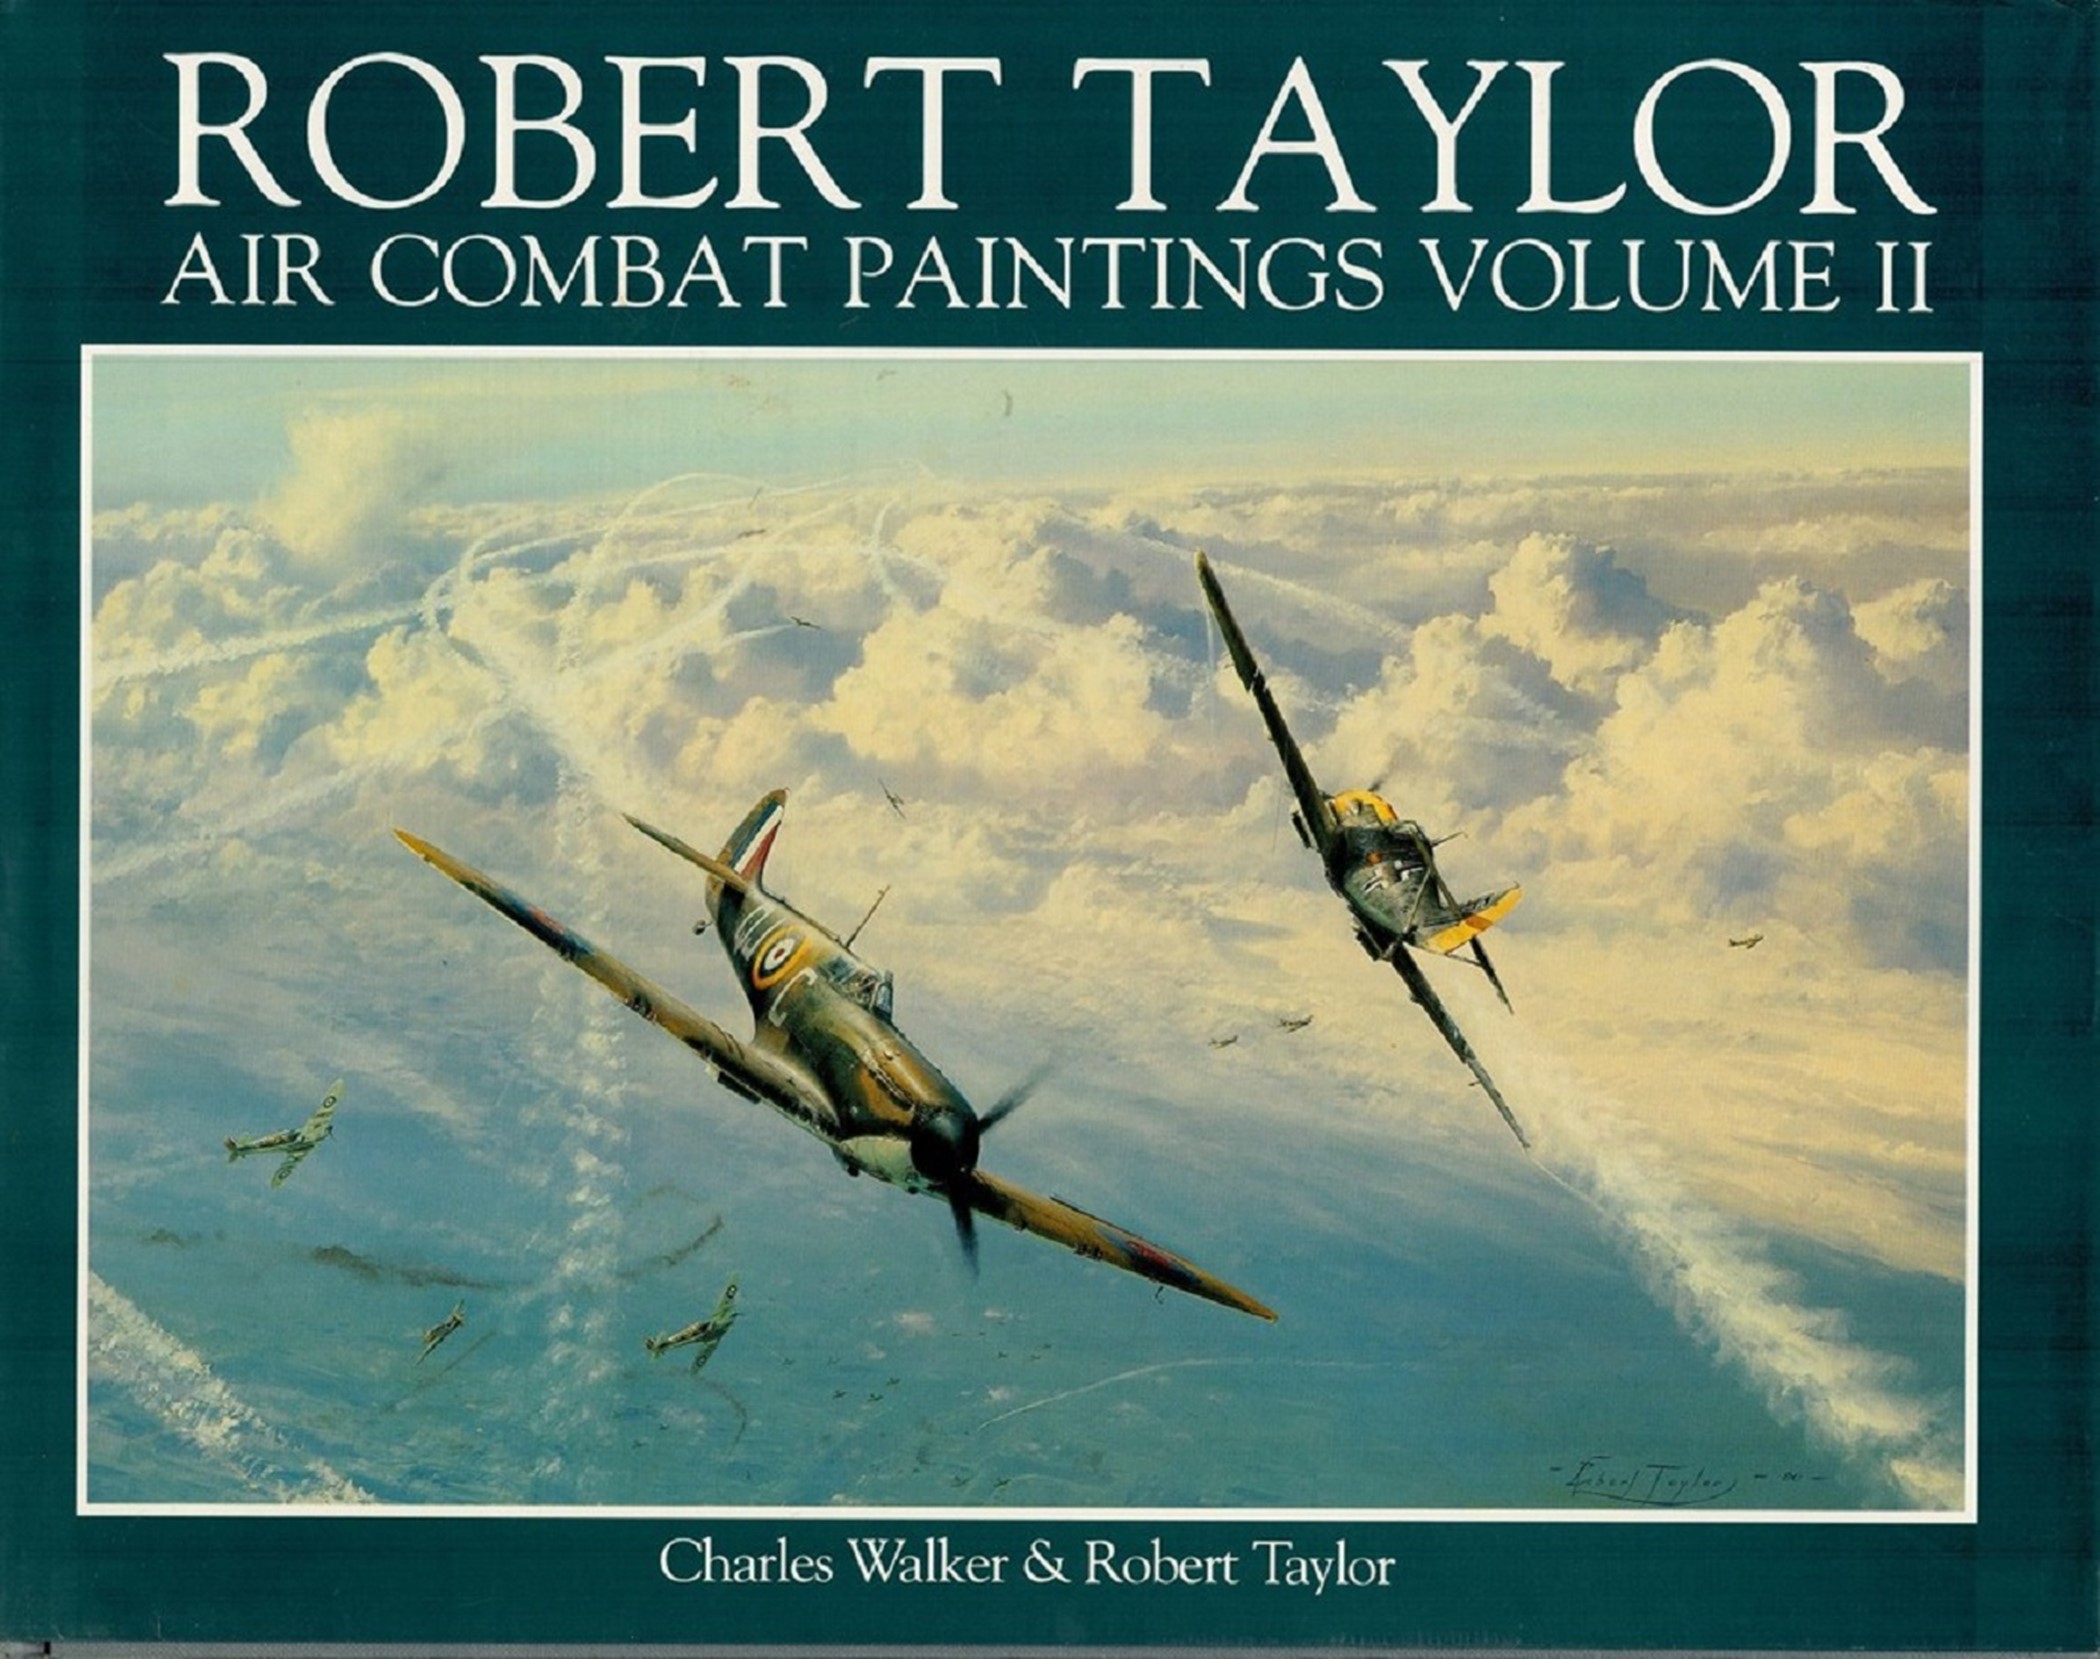 The Air Combat Paintings of Robert Taylor volumes 1, 2, 3, vol 1 1995 7th Edition with Slipcase, vol - Image 2 of 3